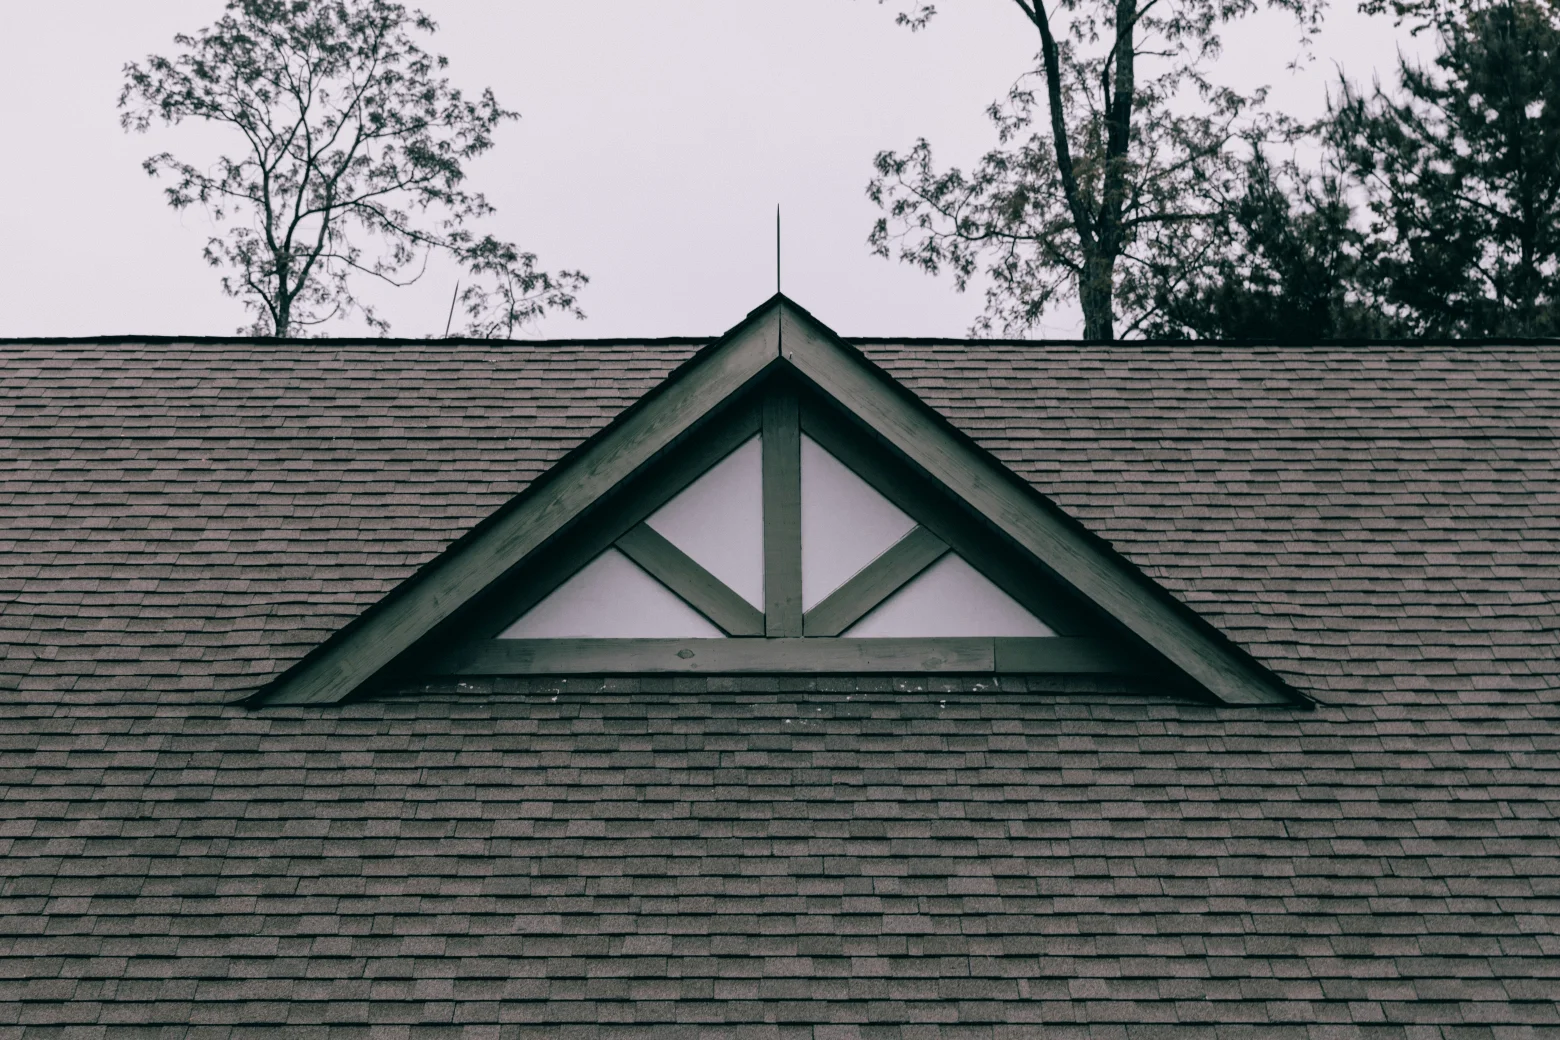 Checking your roof materials and roof flashing is important for your roof's lifespan